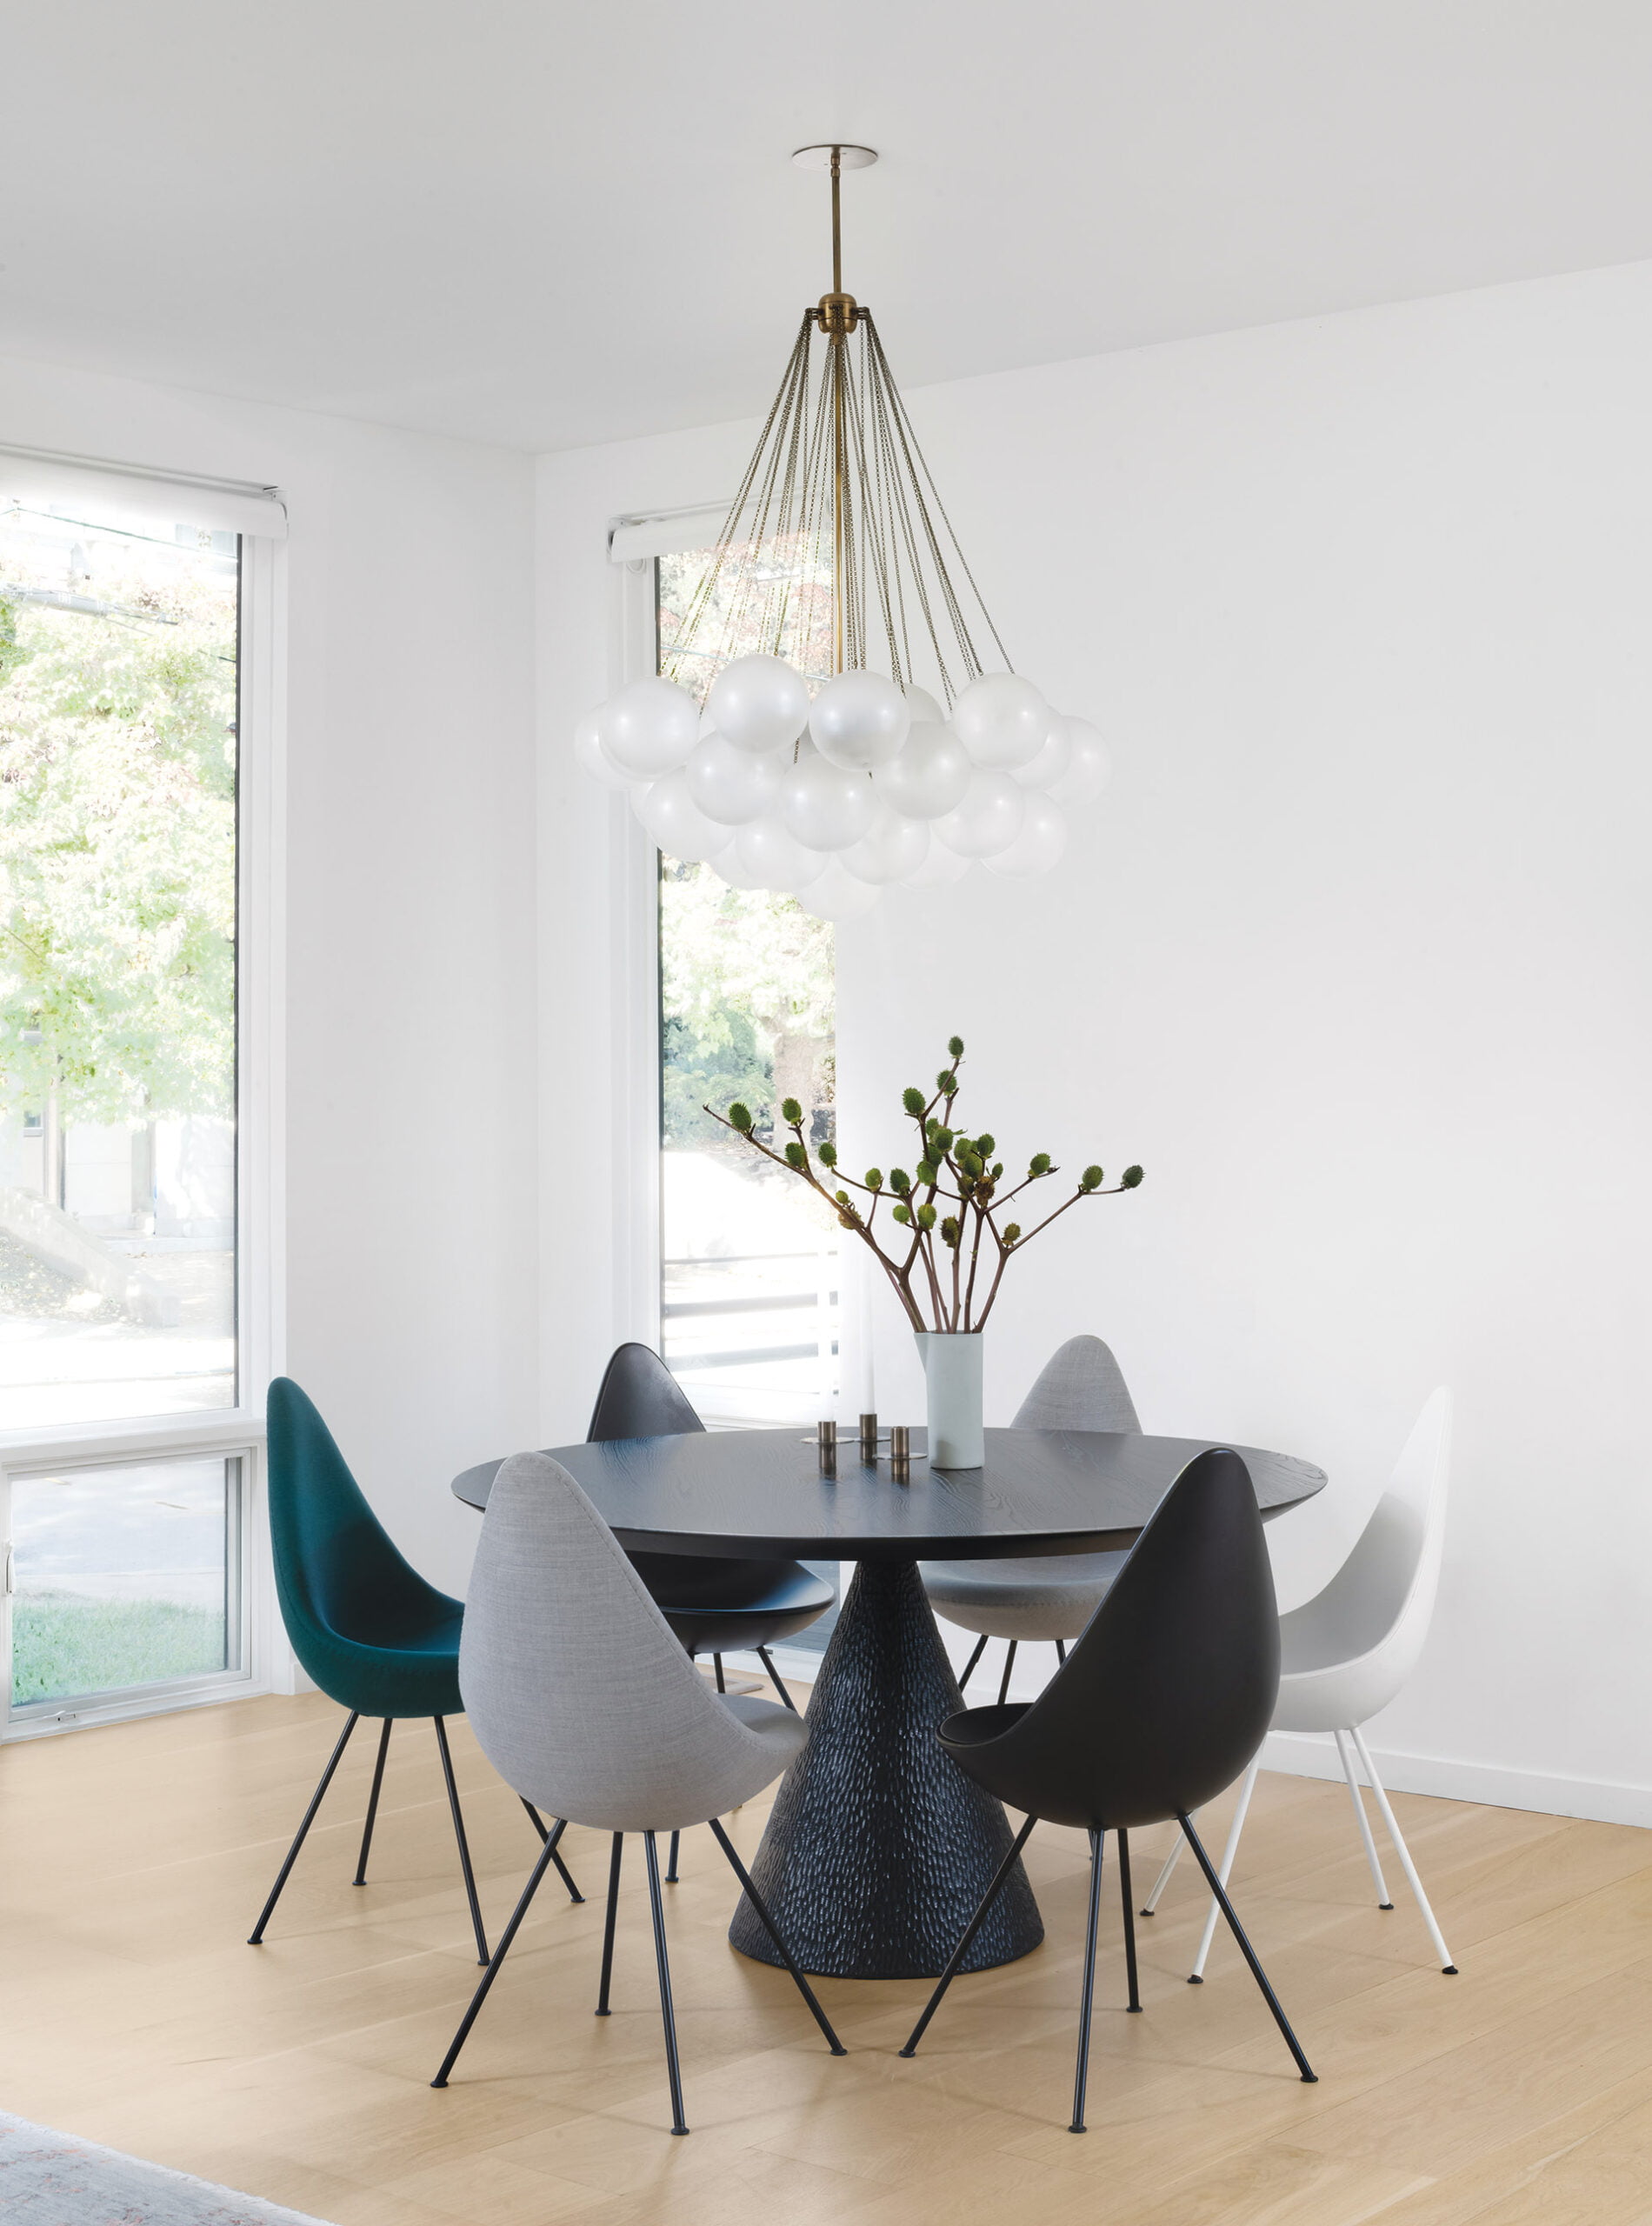 Dining room table and Arne Jacobsen Drop chairs upholstered in Kvadrat fabrics from Furniture From Scandinavia; an Apparatus chandelier